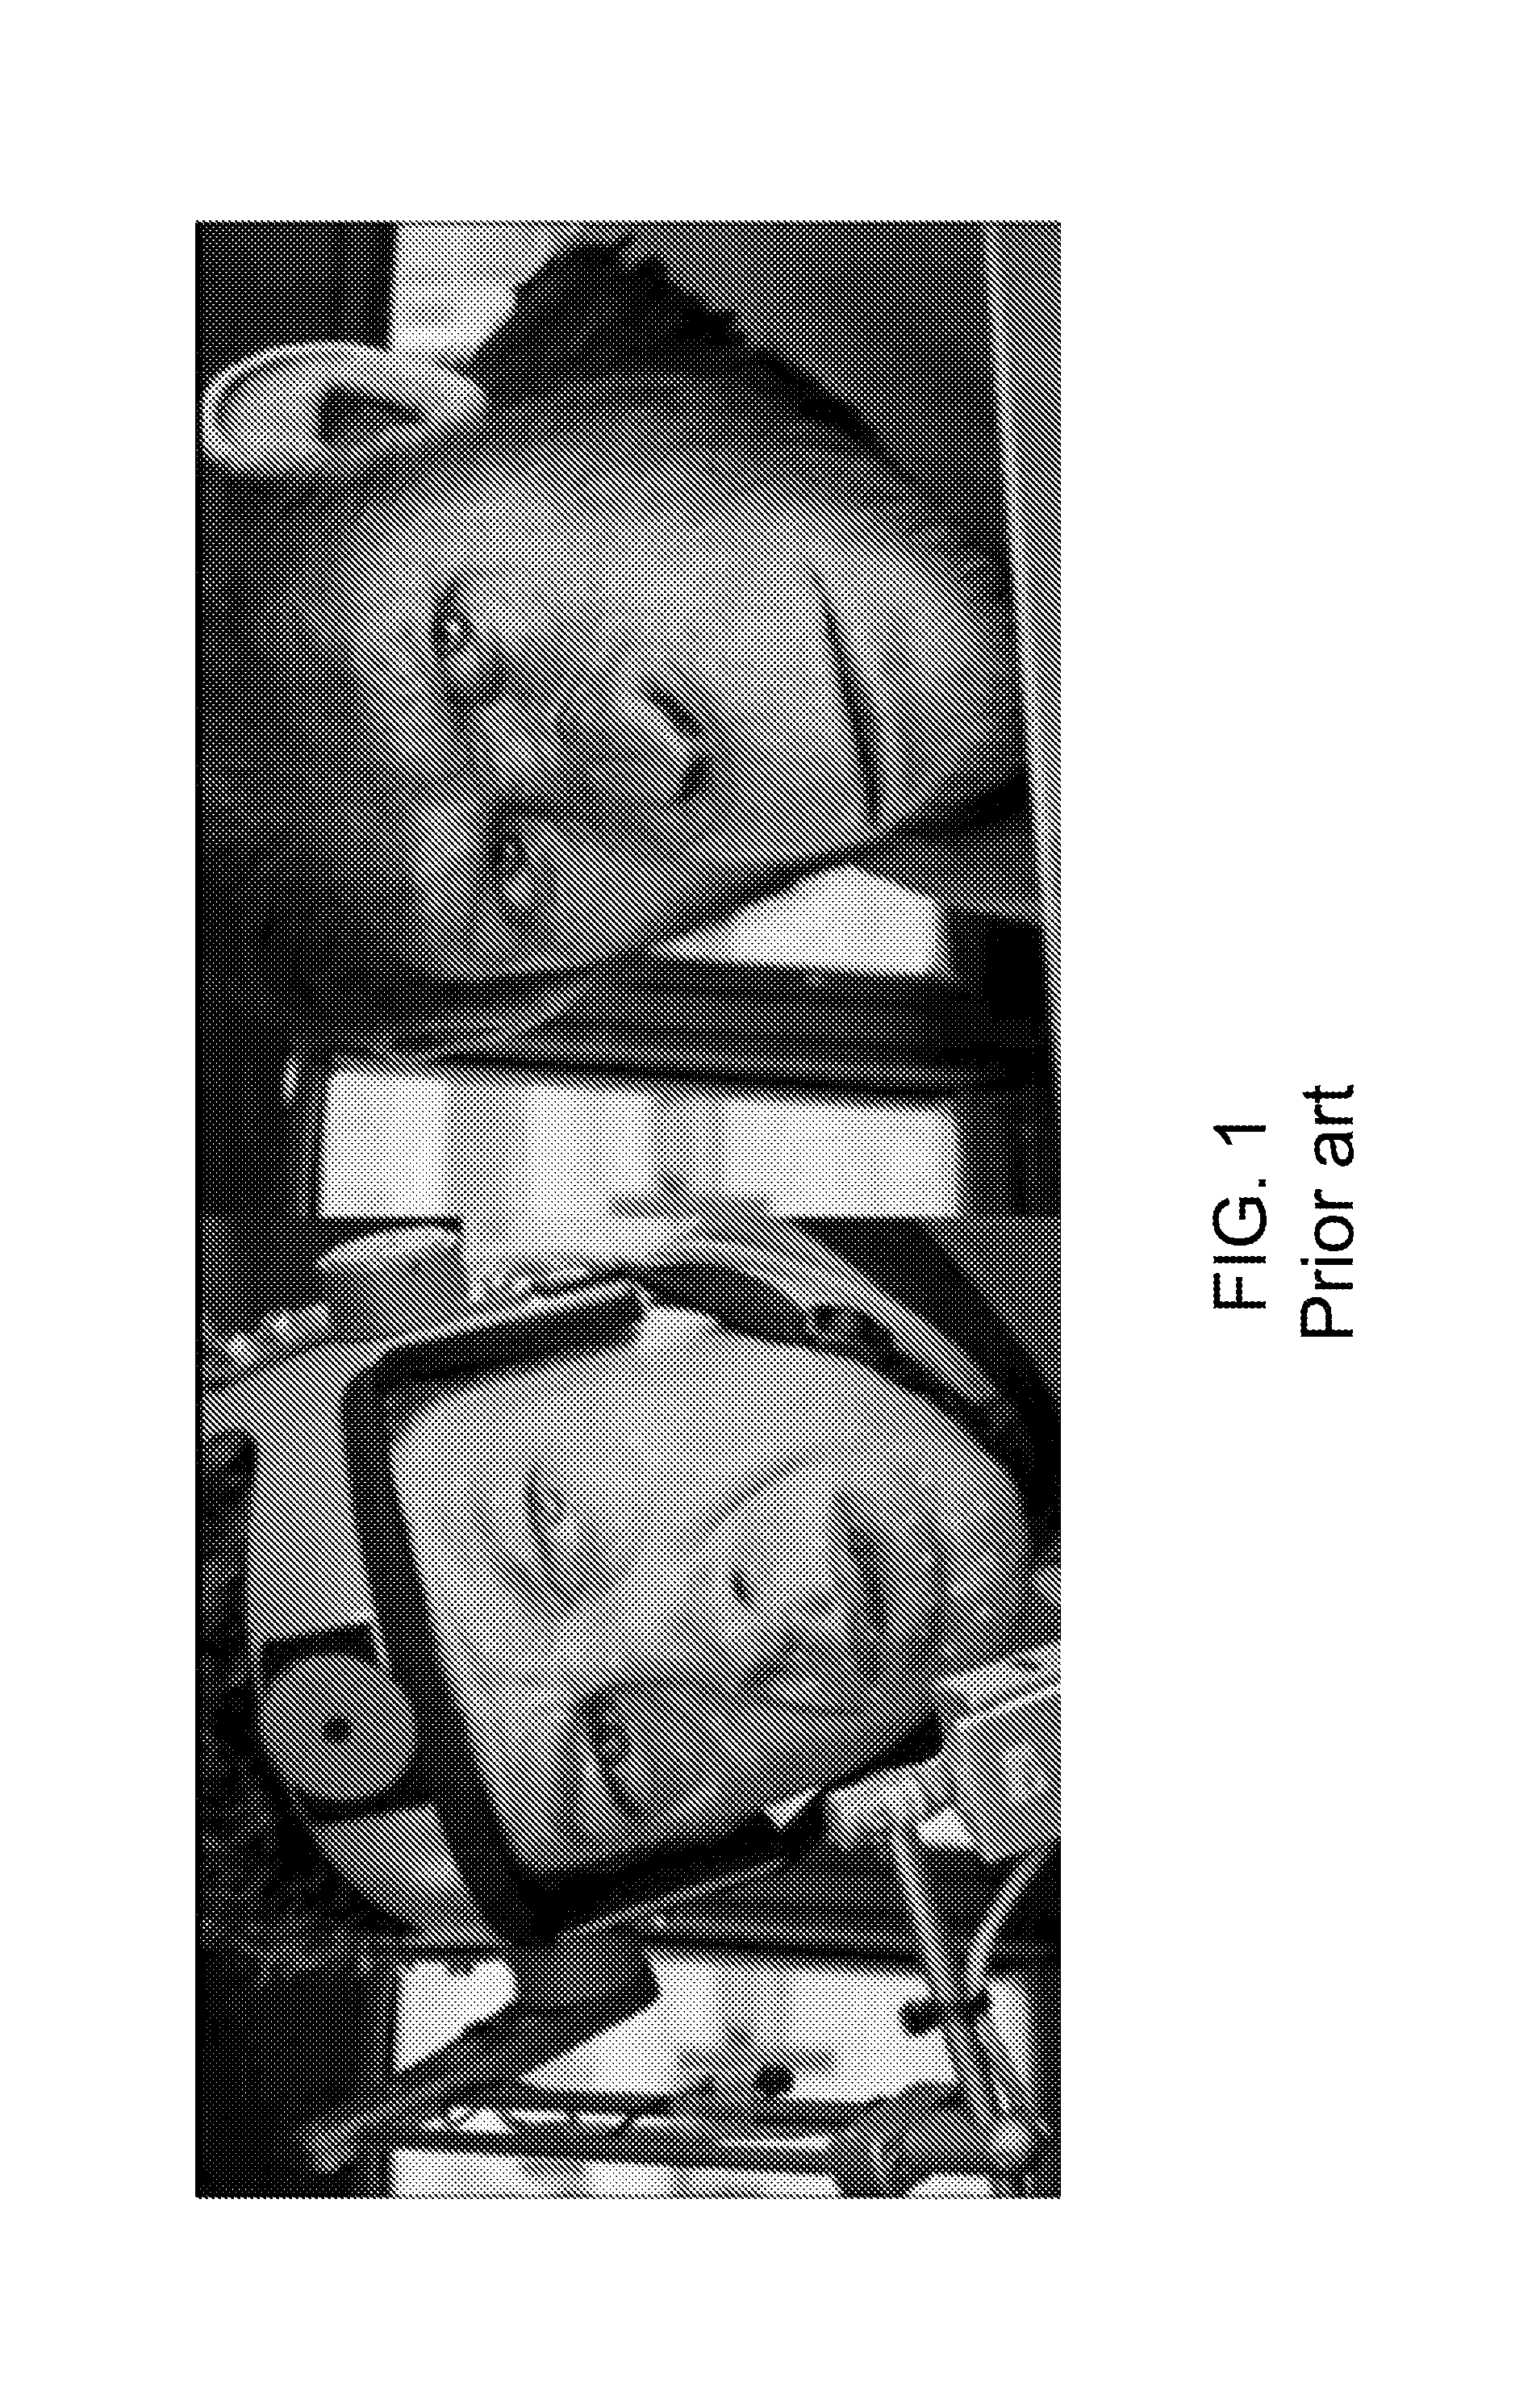 Method of 3D model morphing driven by facial tracking and electronic device using the method the same